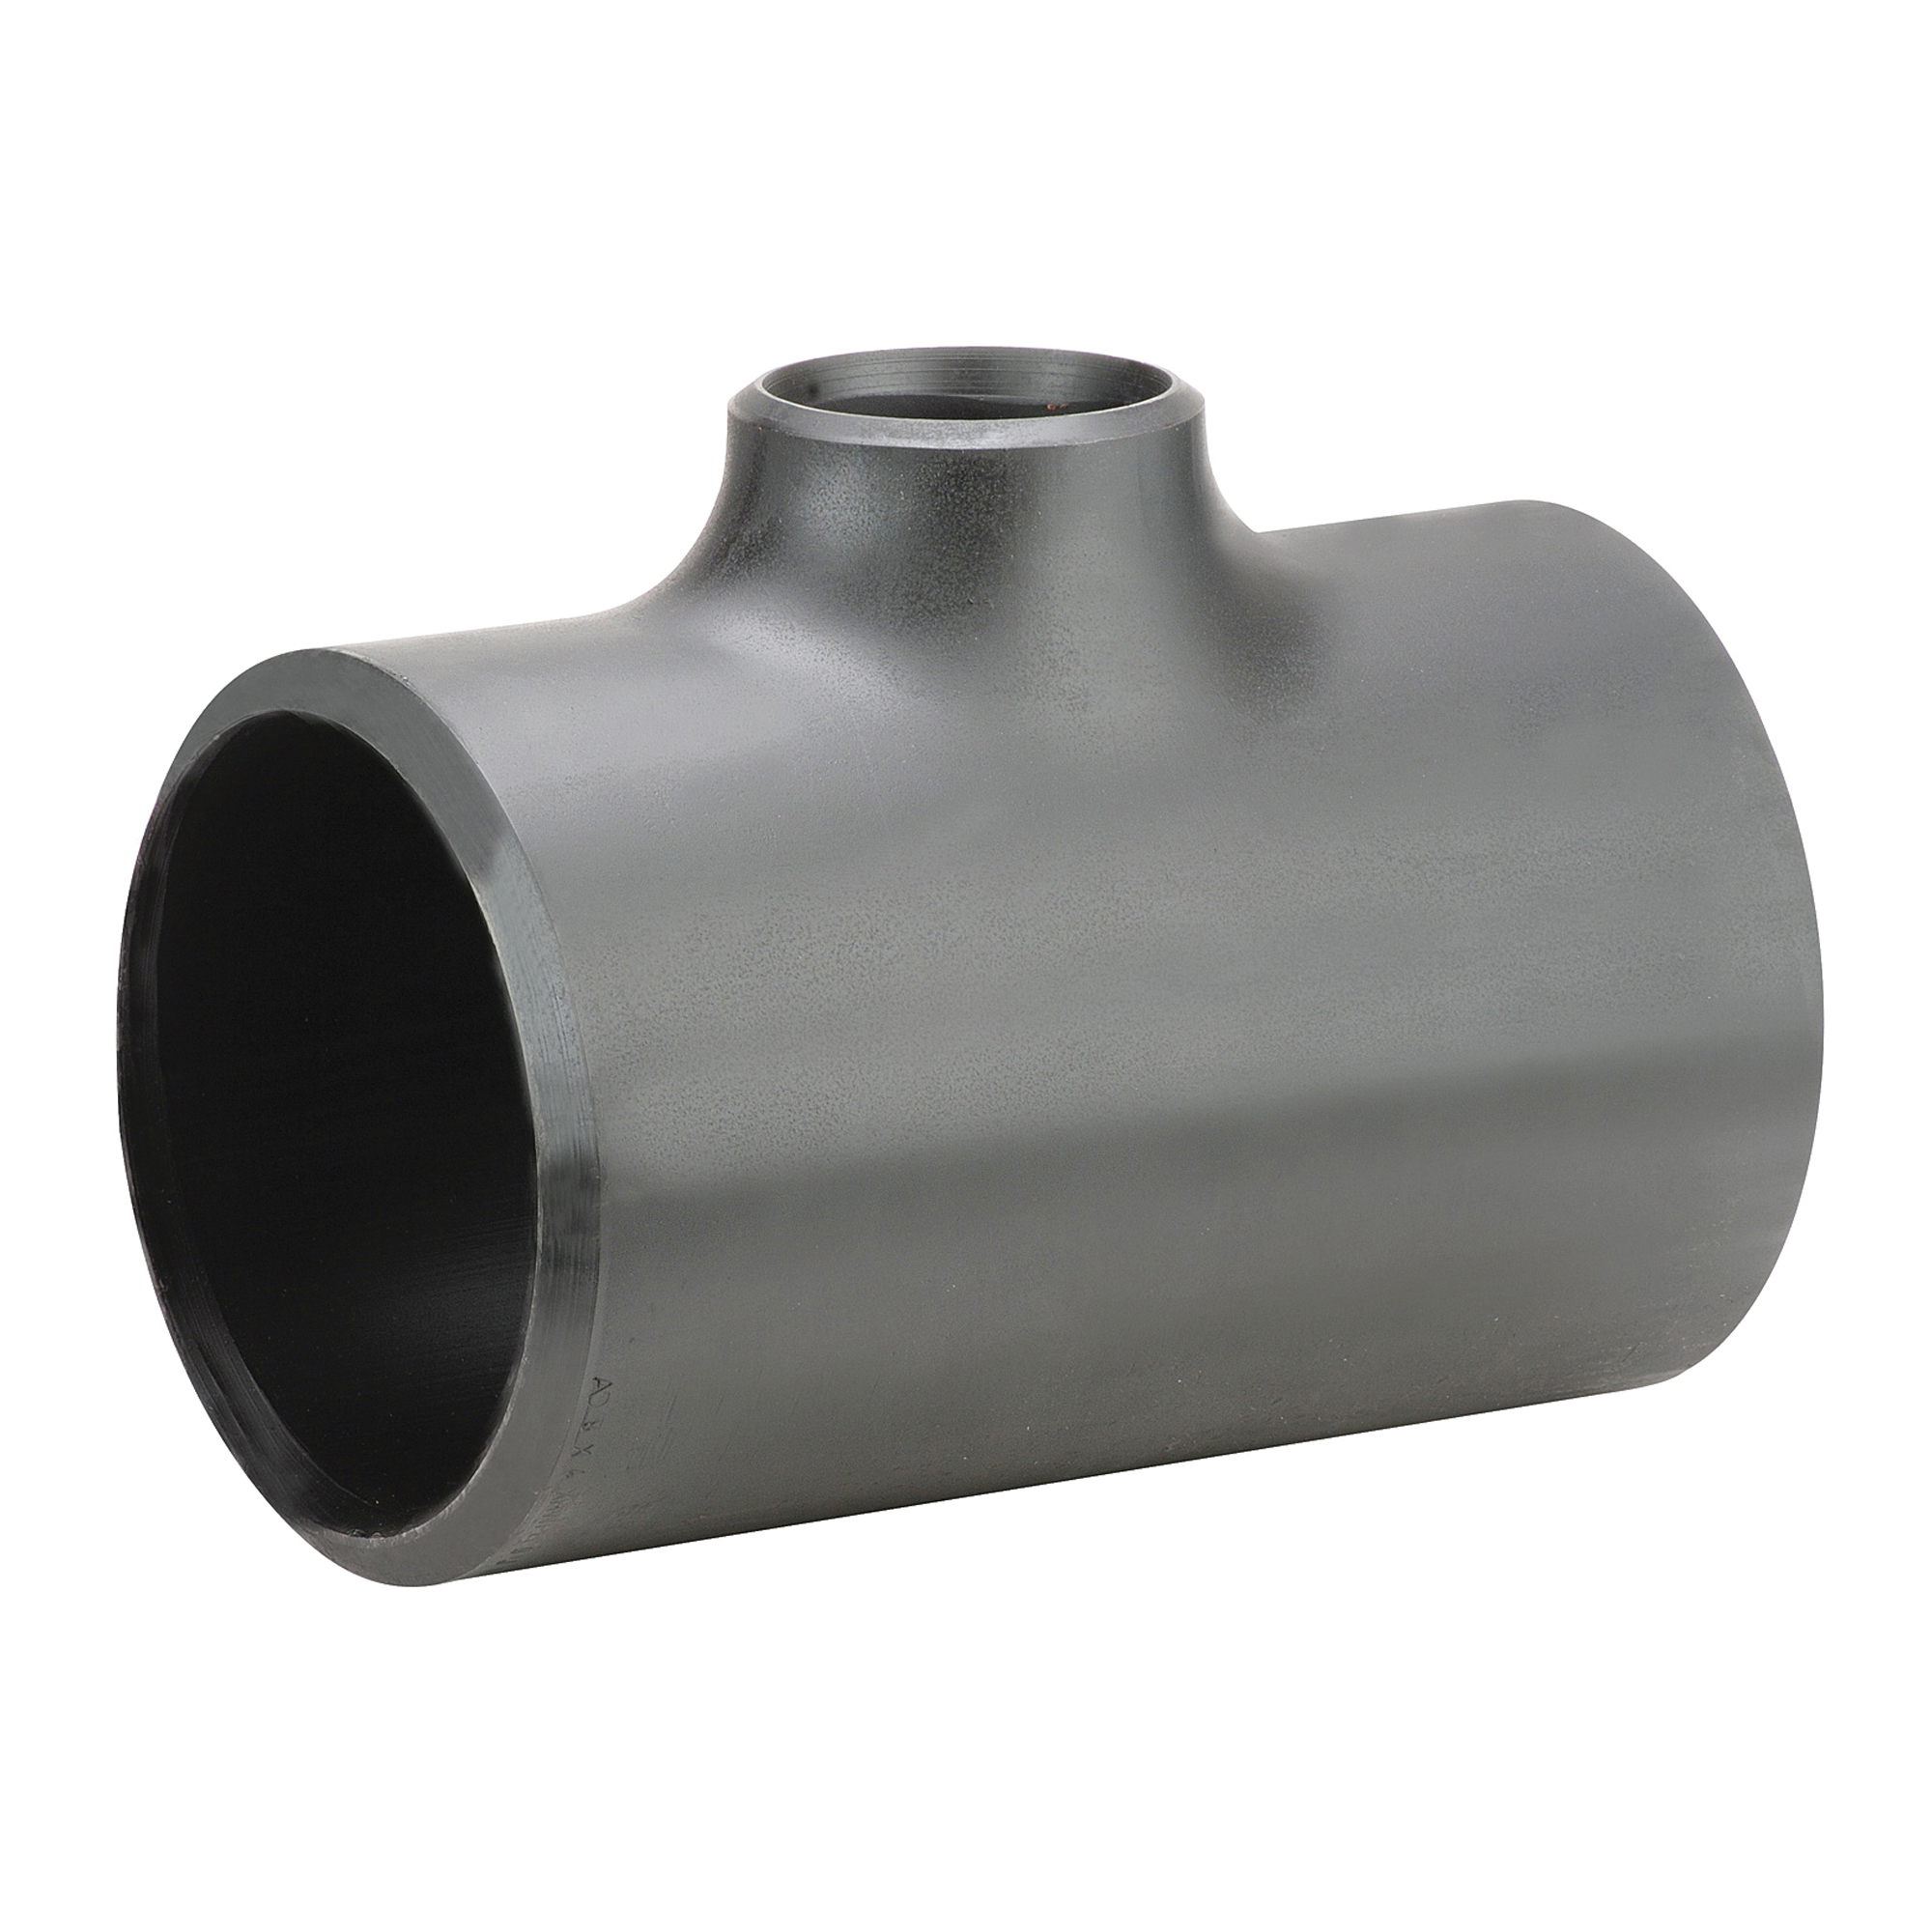 Matco-Norca™ MNRTXH0805 Reducing Tee, 2 x 1 in, SCH 80/XH - Carbon Steel Pipe Fittings